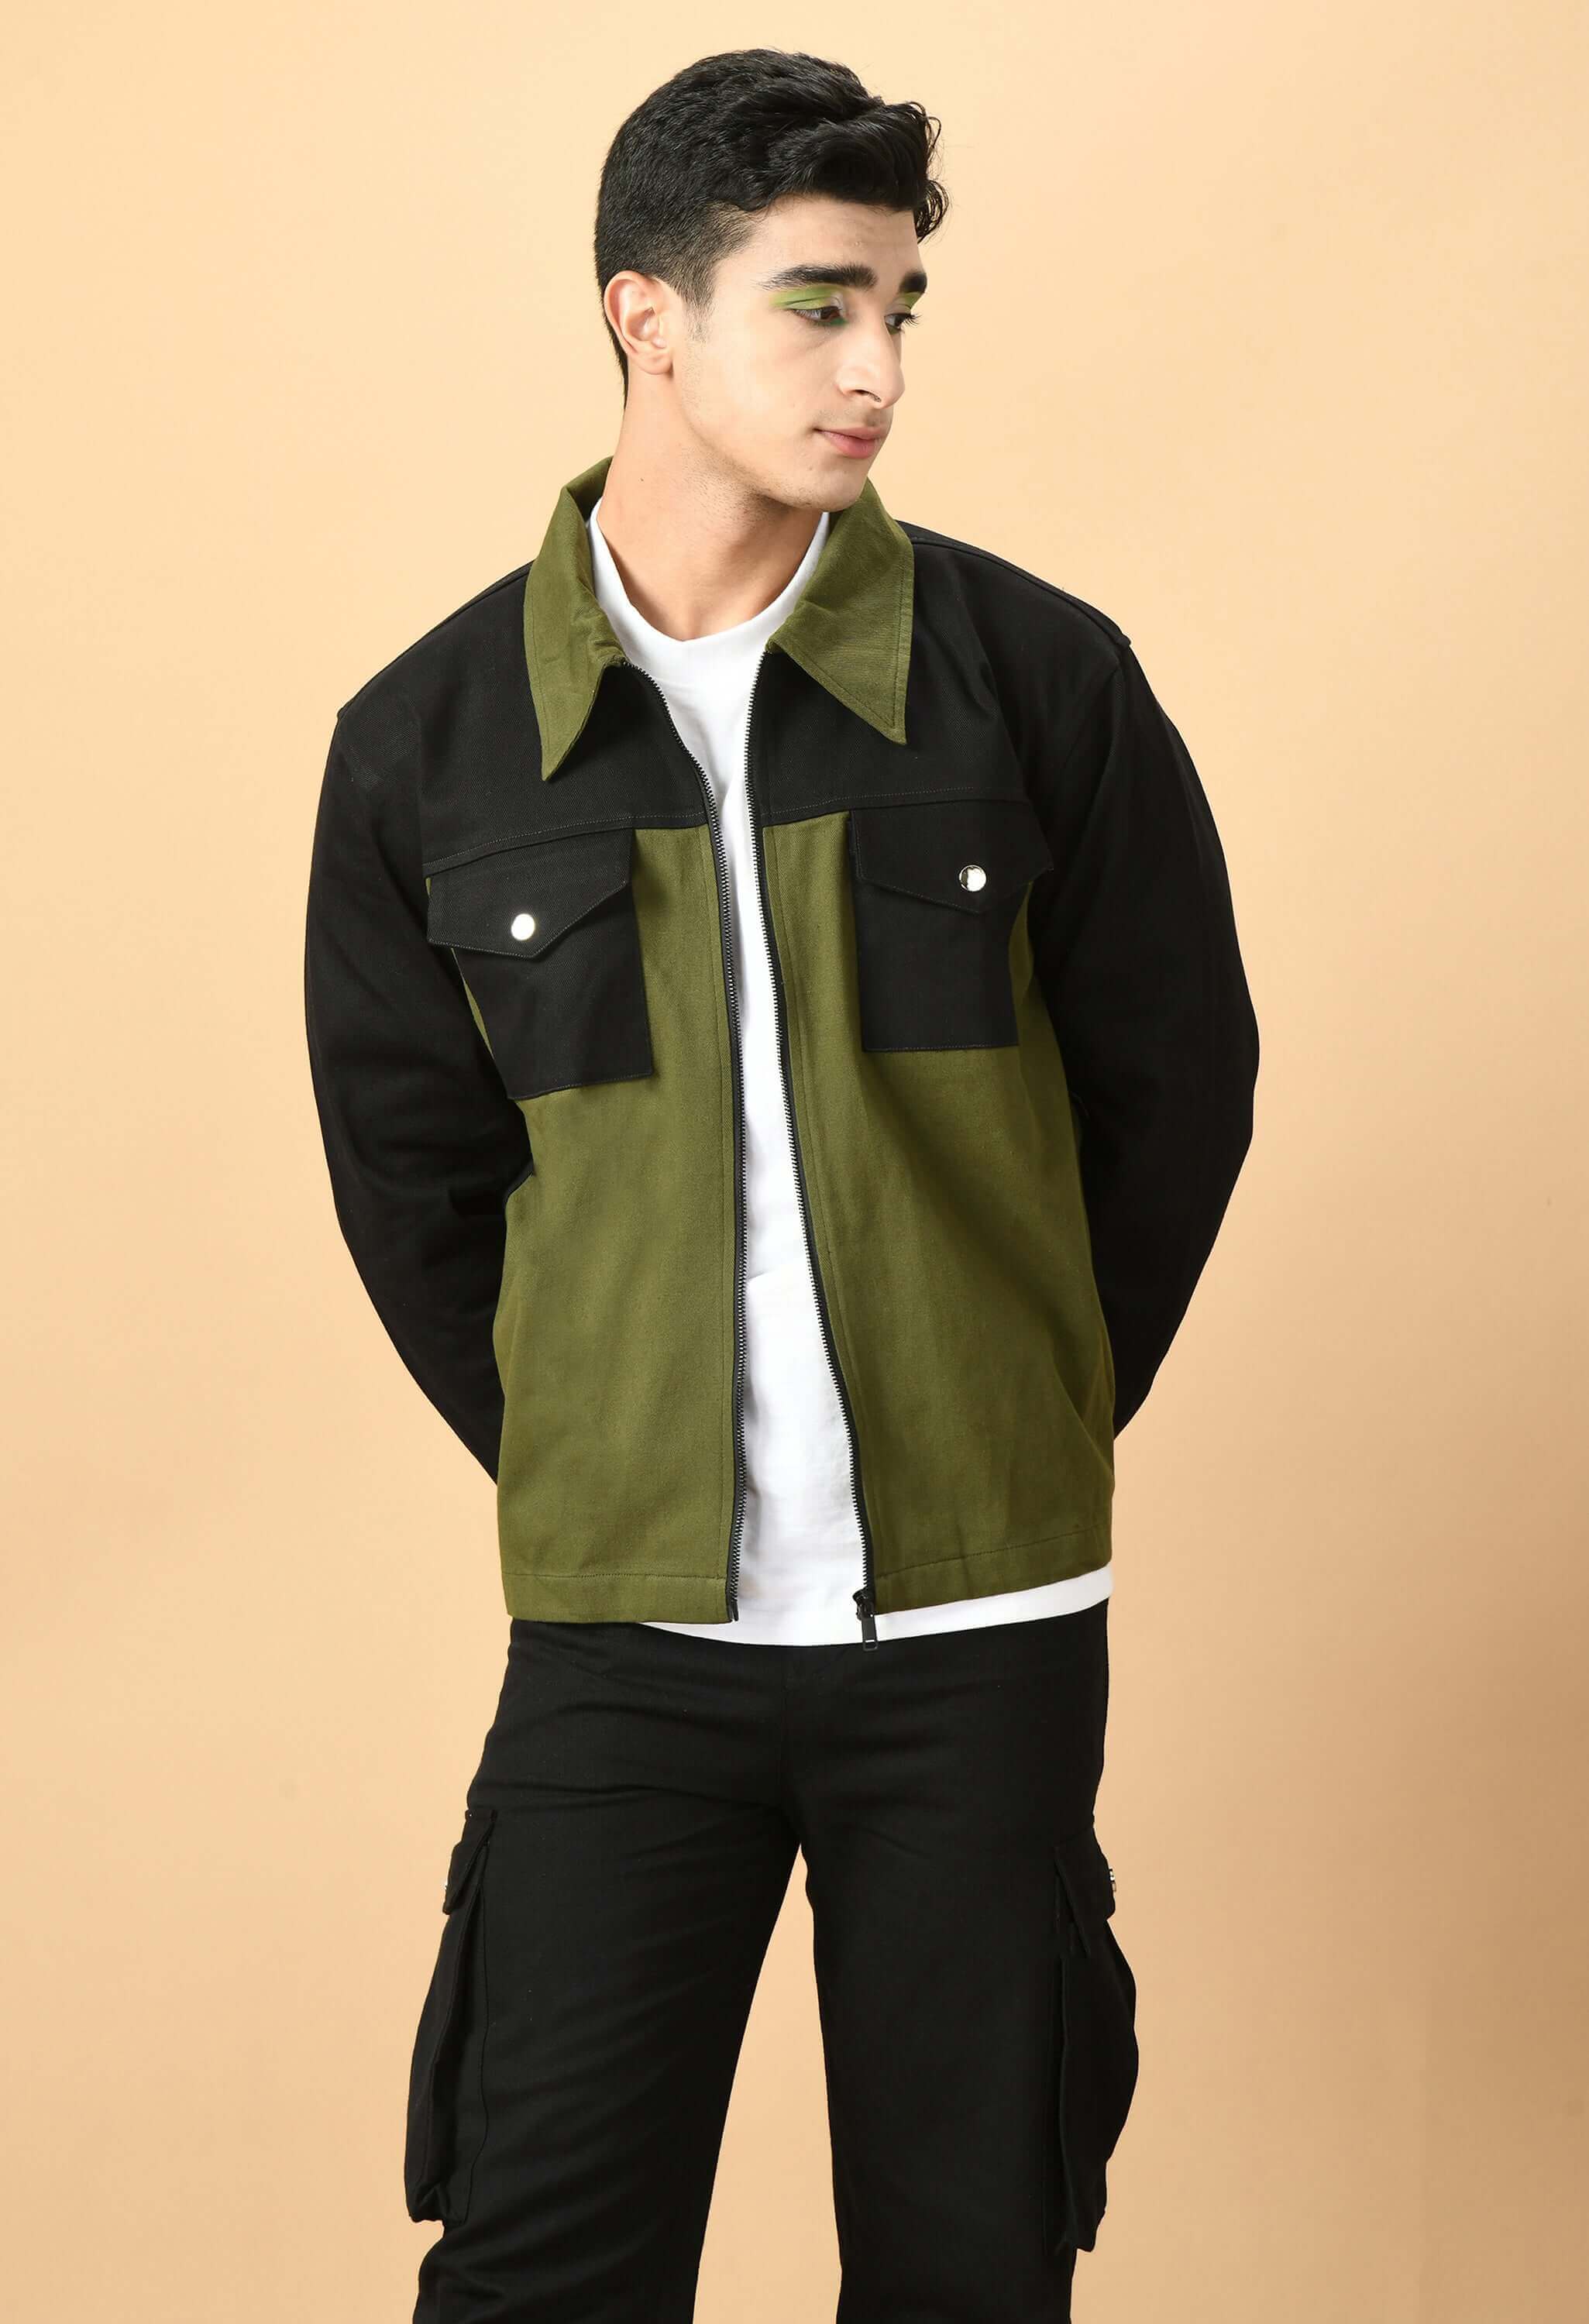  Black And Olive Color Overshirt By Offmint